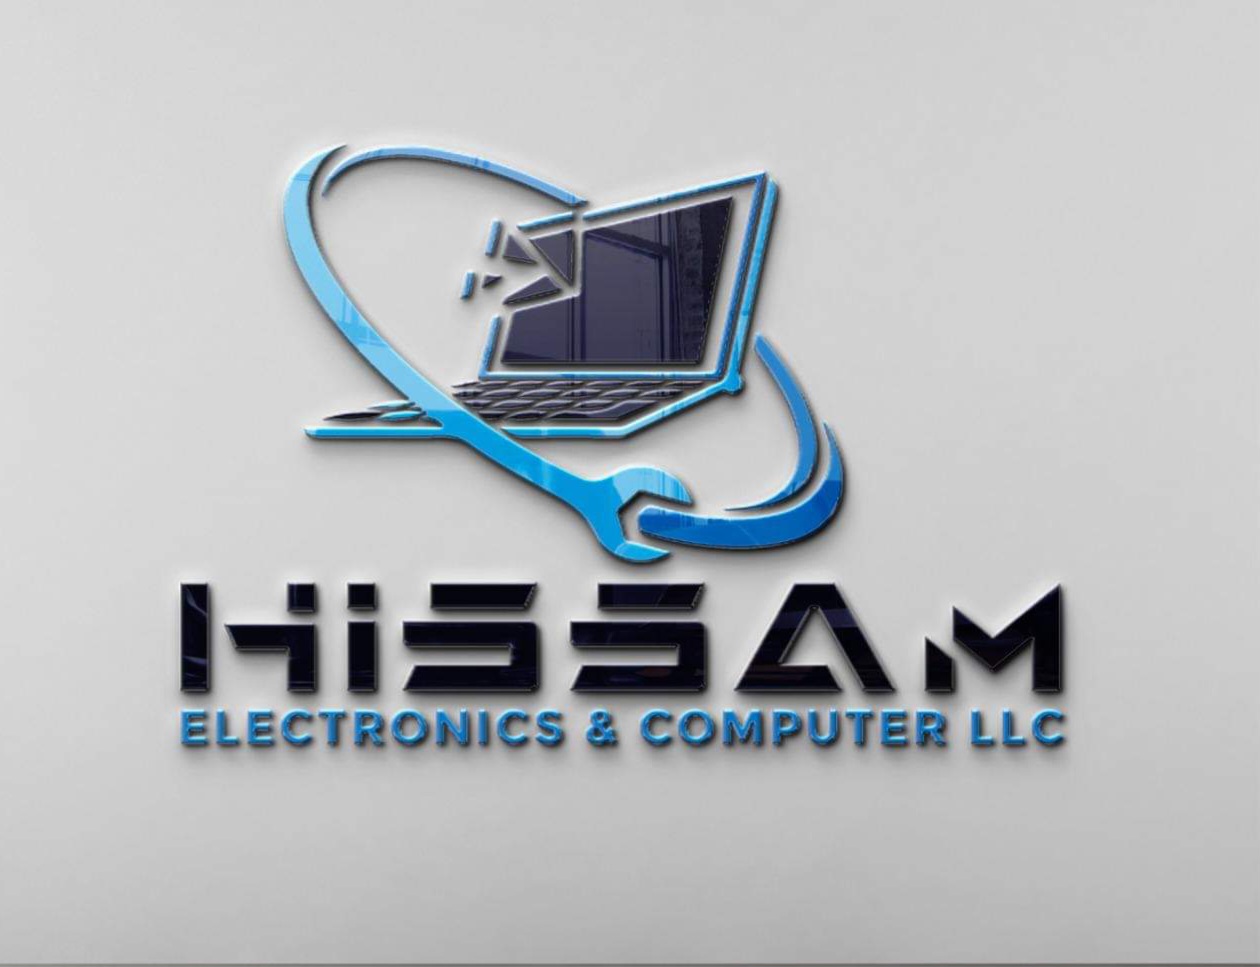 Hissam Electronics and computers